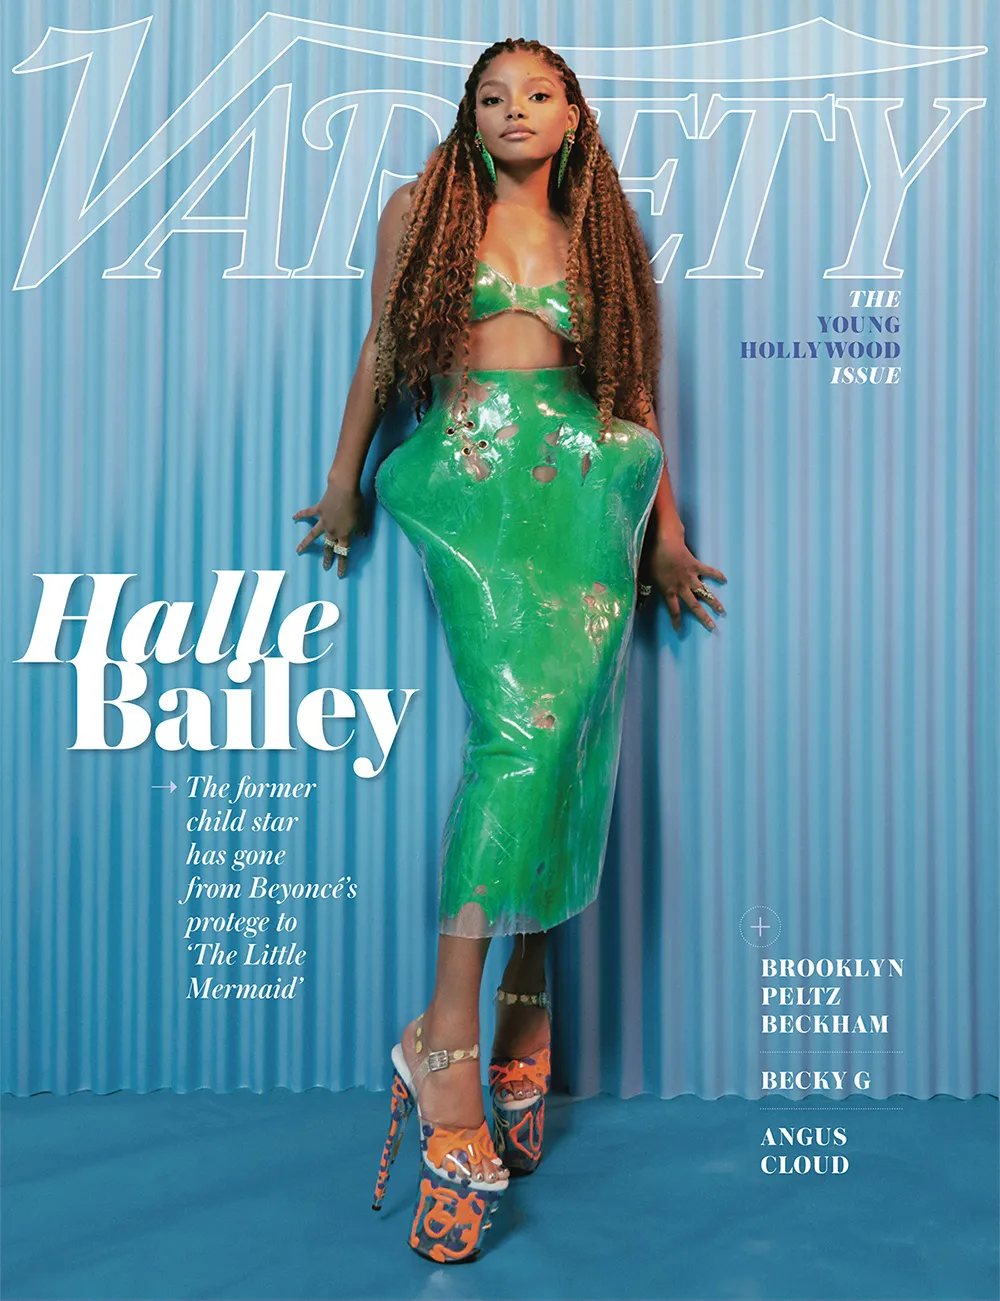 Halle Bailey, Angus Cloud, Becky G and Brooklyn Joseph Beckham on the cover of "Variety" magazine "The Young Hollywood Issue" | FMV6